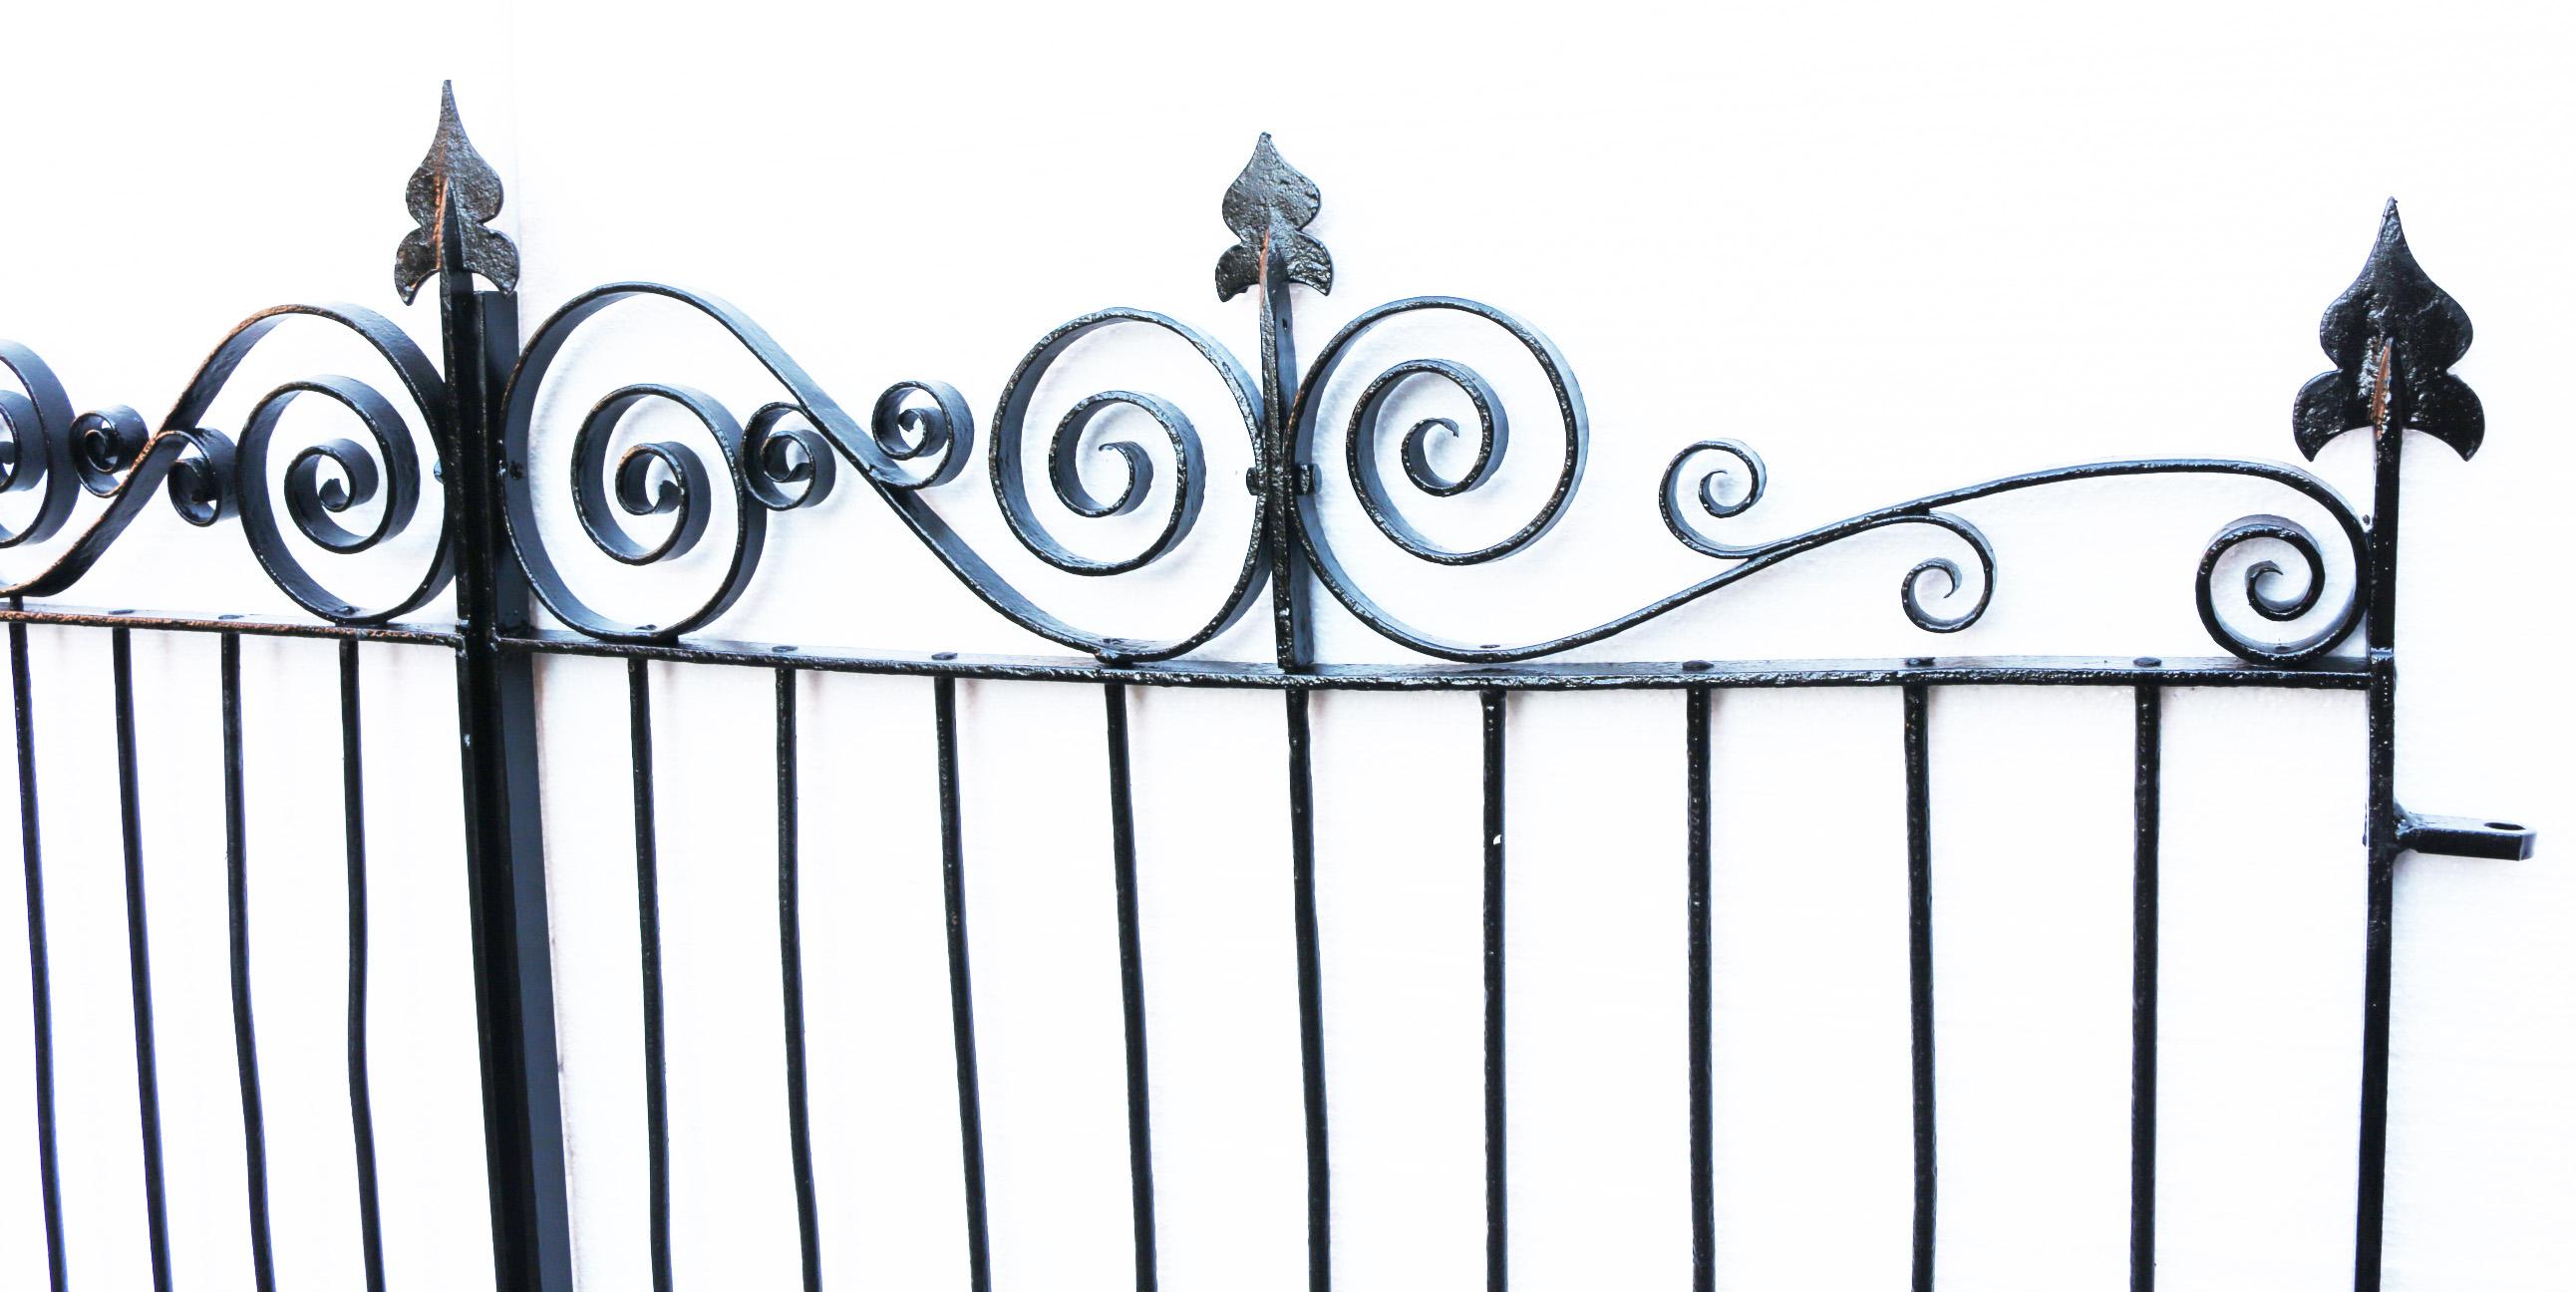 These gates come with complete hinges and working latch. They have been sand blasted, primed and painted, and are ready to be hung.
Measures: Height 153 cm
Width 164 cm (excluding hinges) to allow for hinges add 14 cm
Depth 2.5 cm
Weight 40 kg.